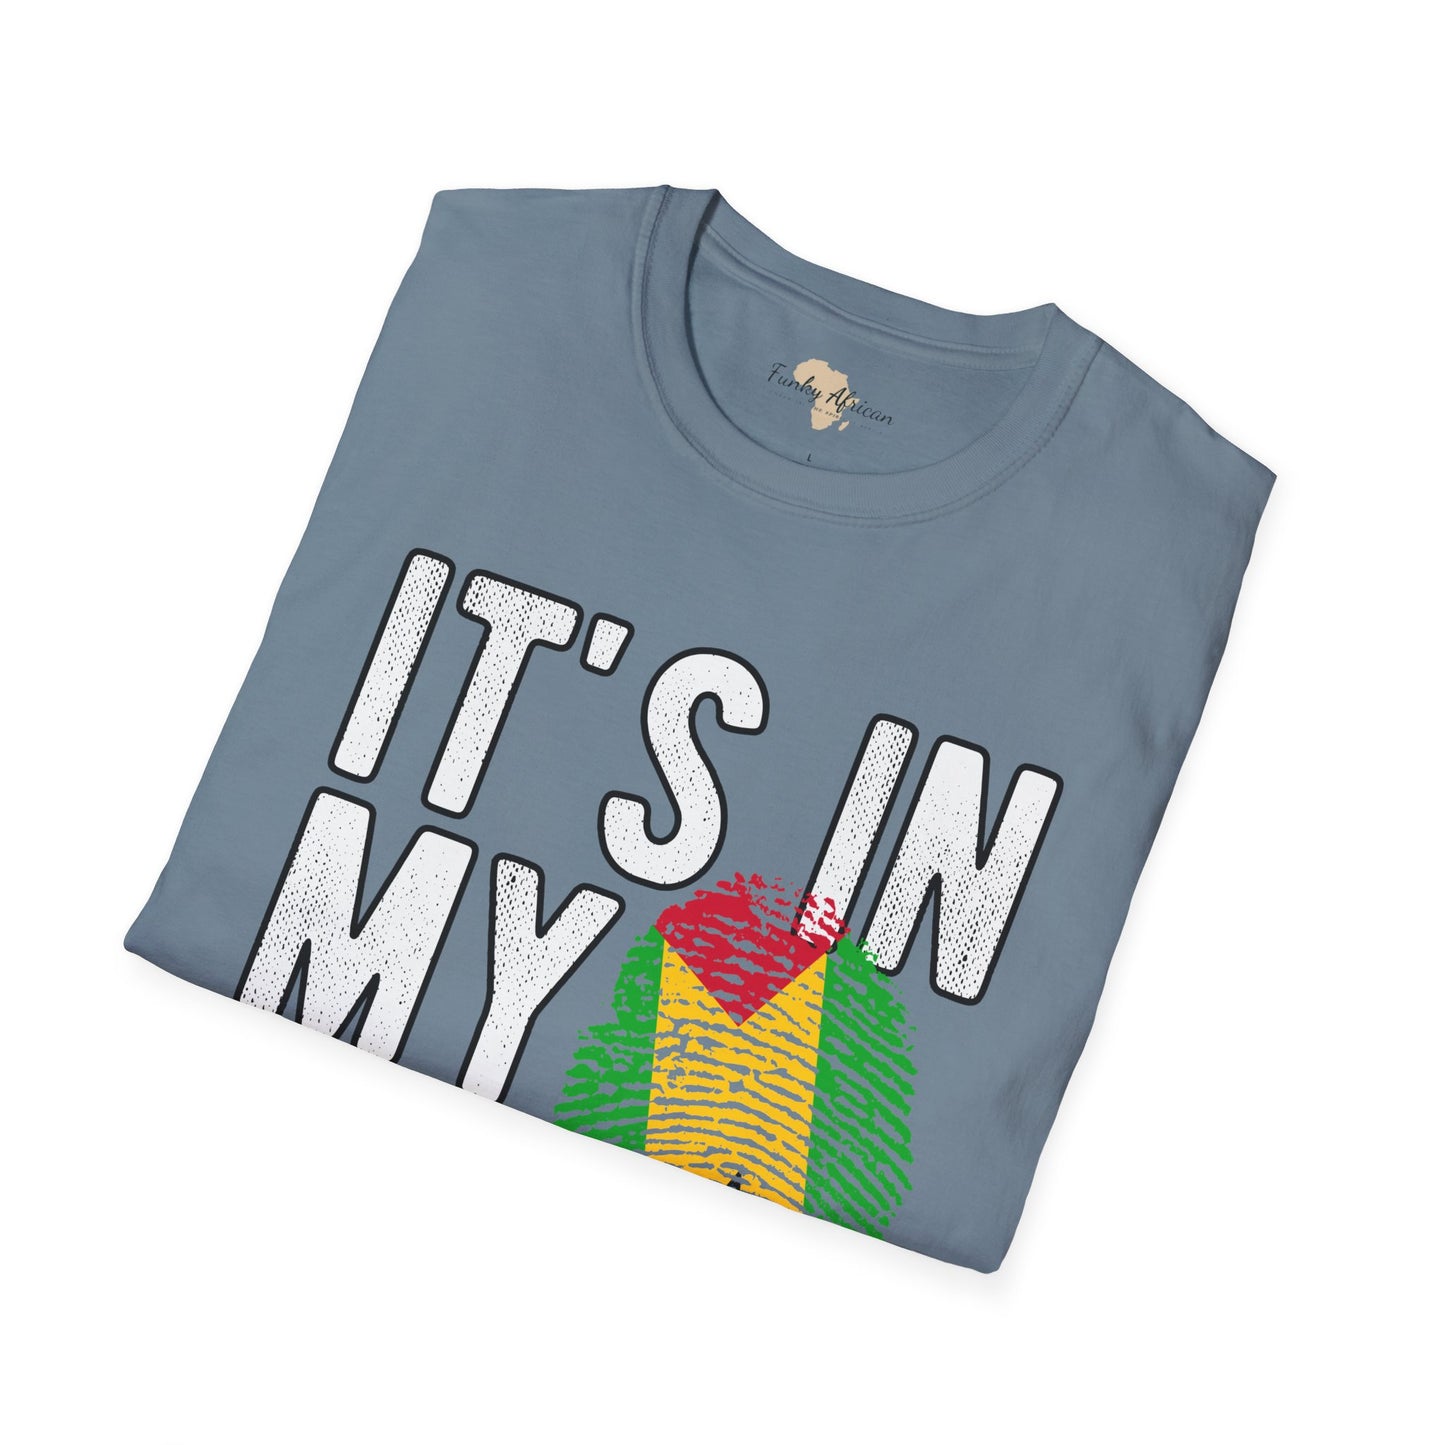 it's in my DNA unisex tee - São Tomé and Príncipe